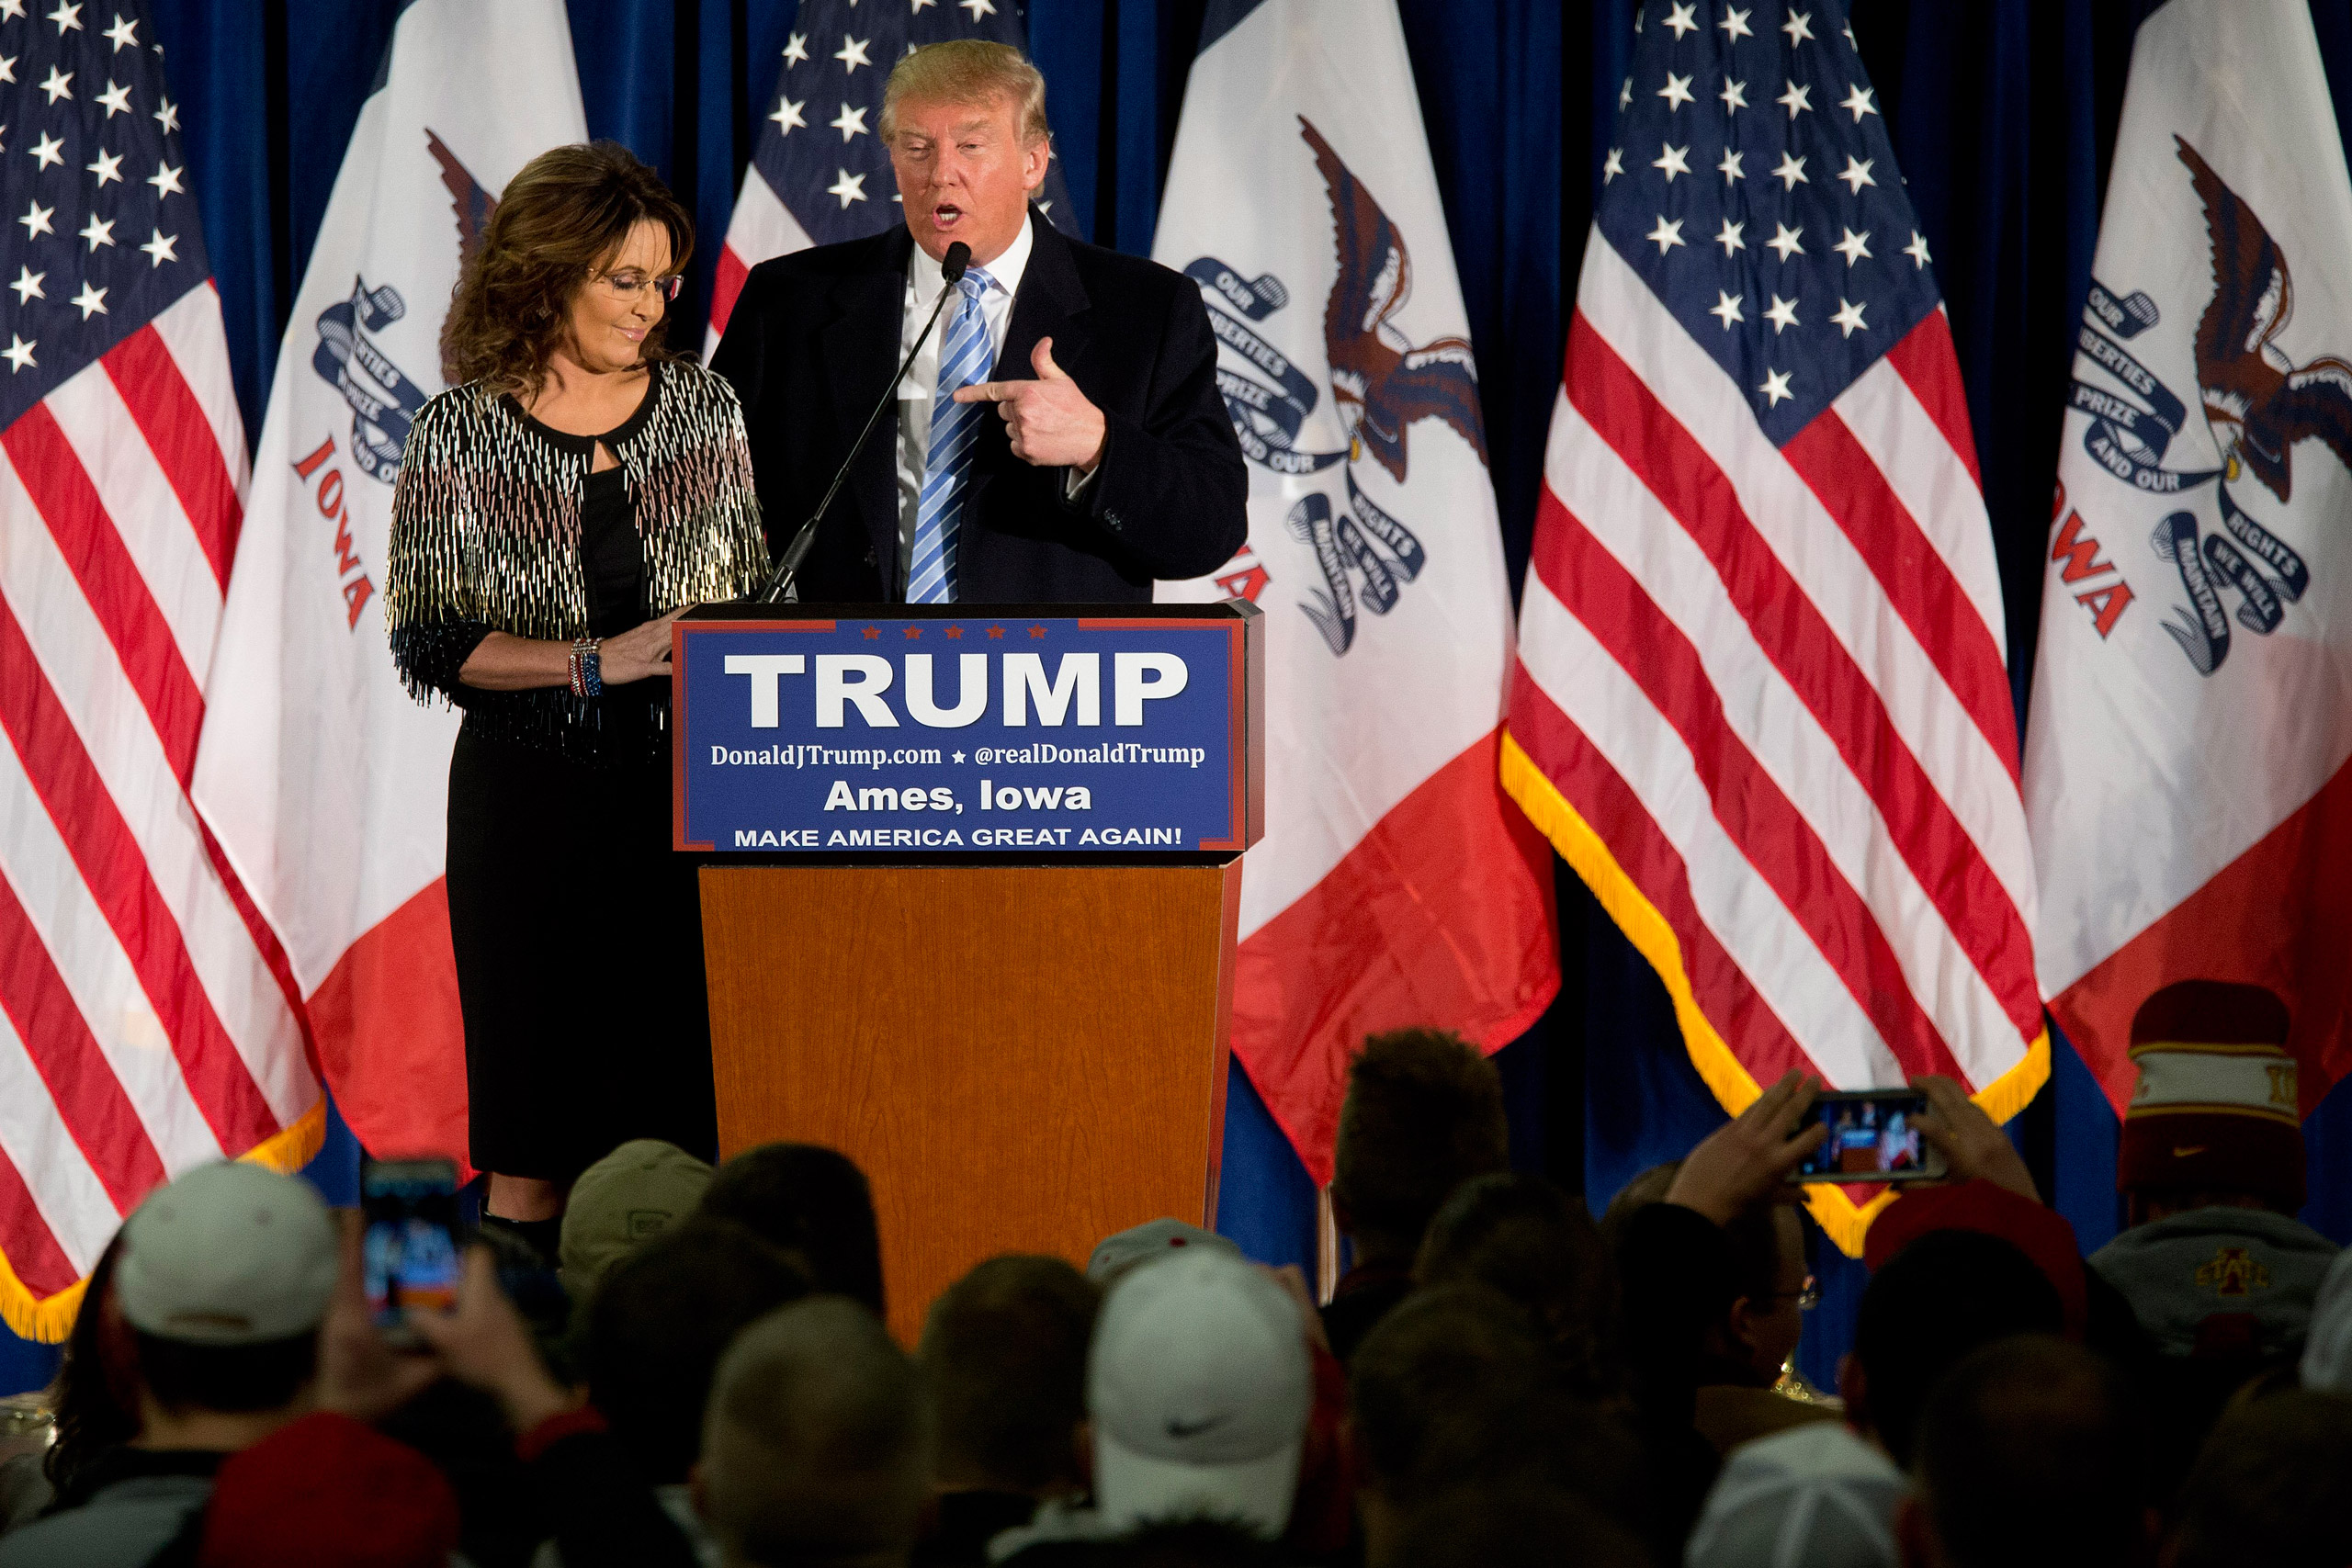 Former Alaska Gov. Sarah Palin, left,  endorses Republican presidential candidate Donald Trump during a rally at the Iowa State University in Ames, Iowa, on Jan. 19, 2016. (Mary Altaffer—AP)